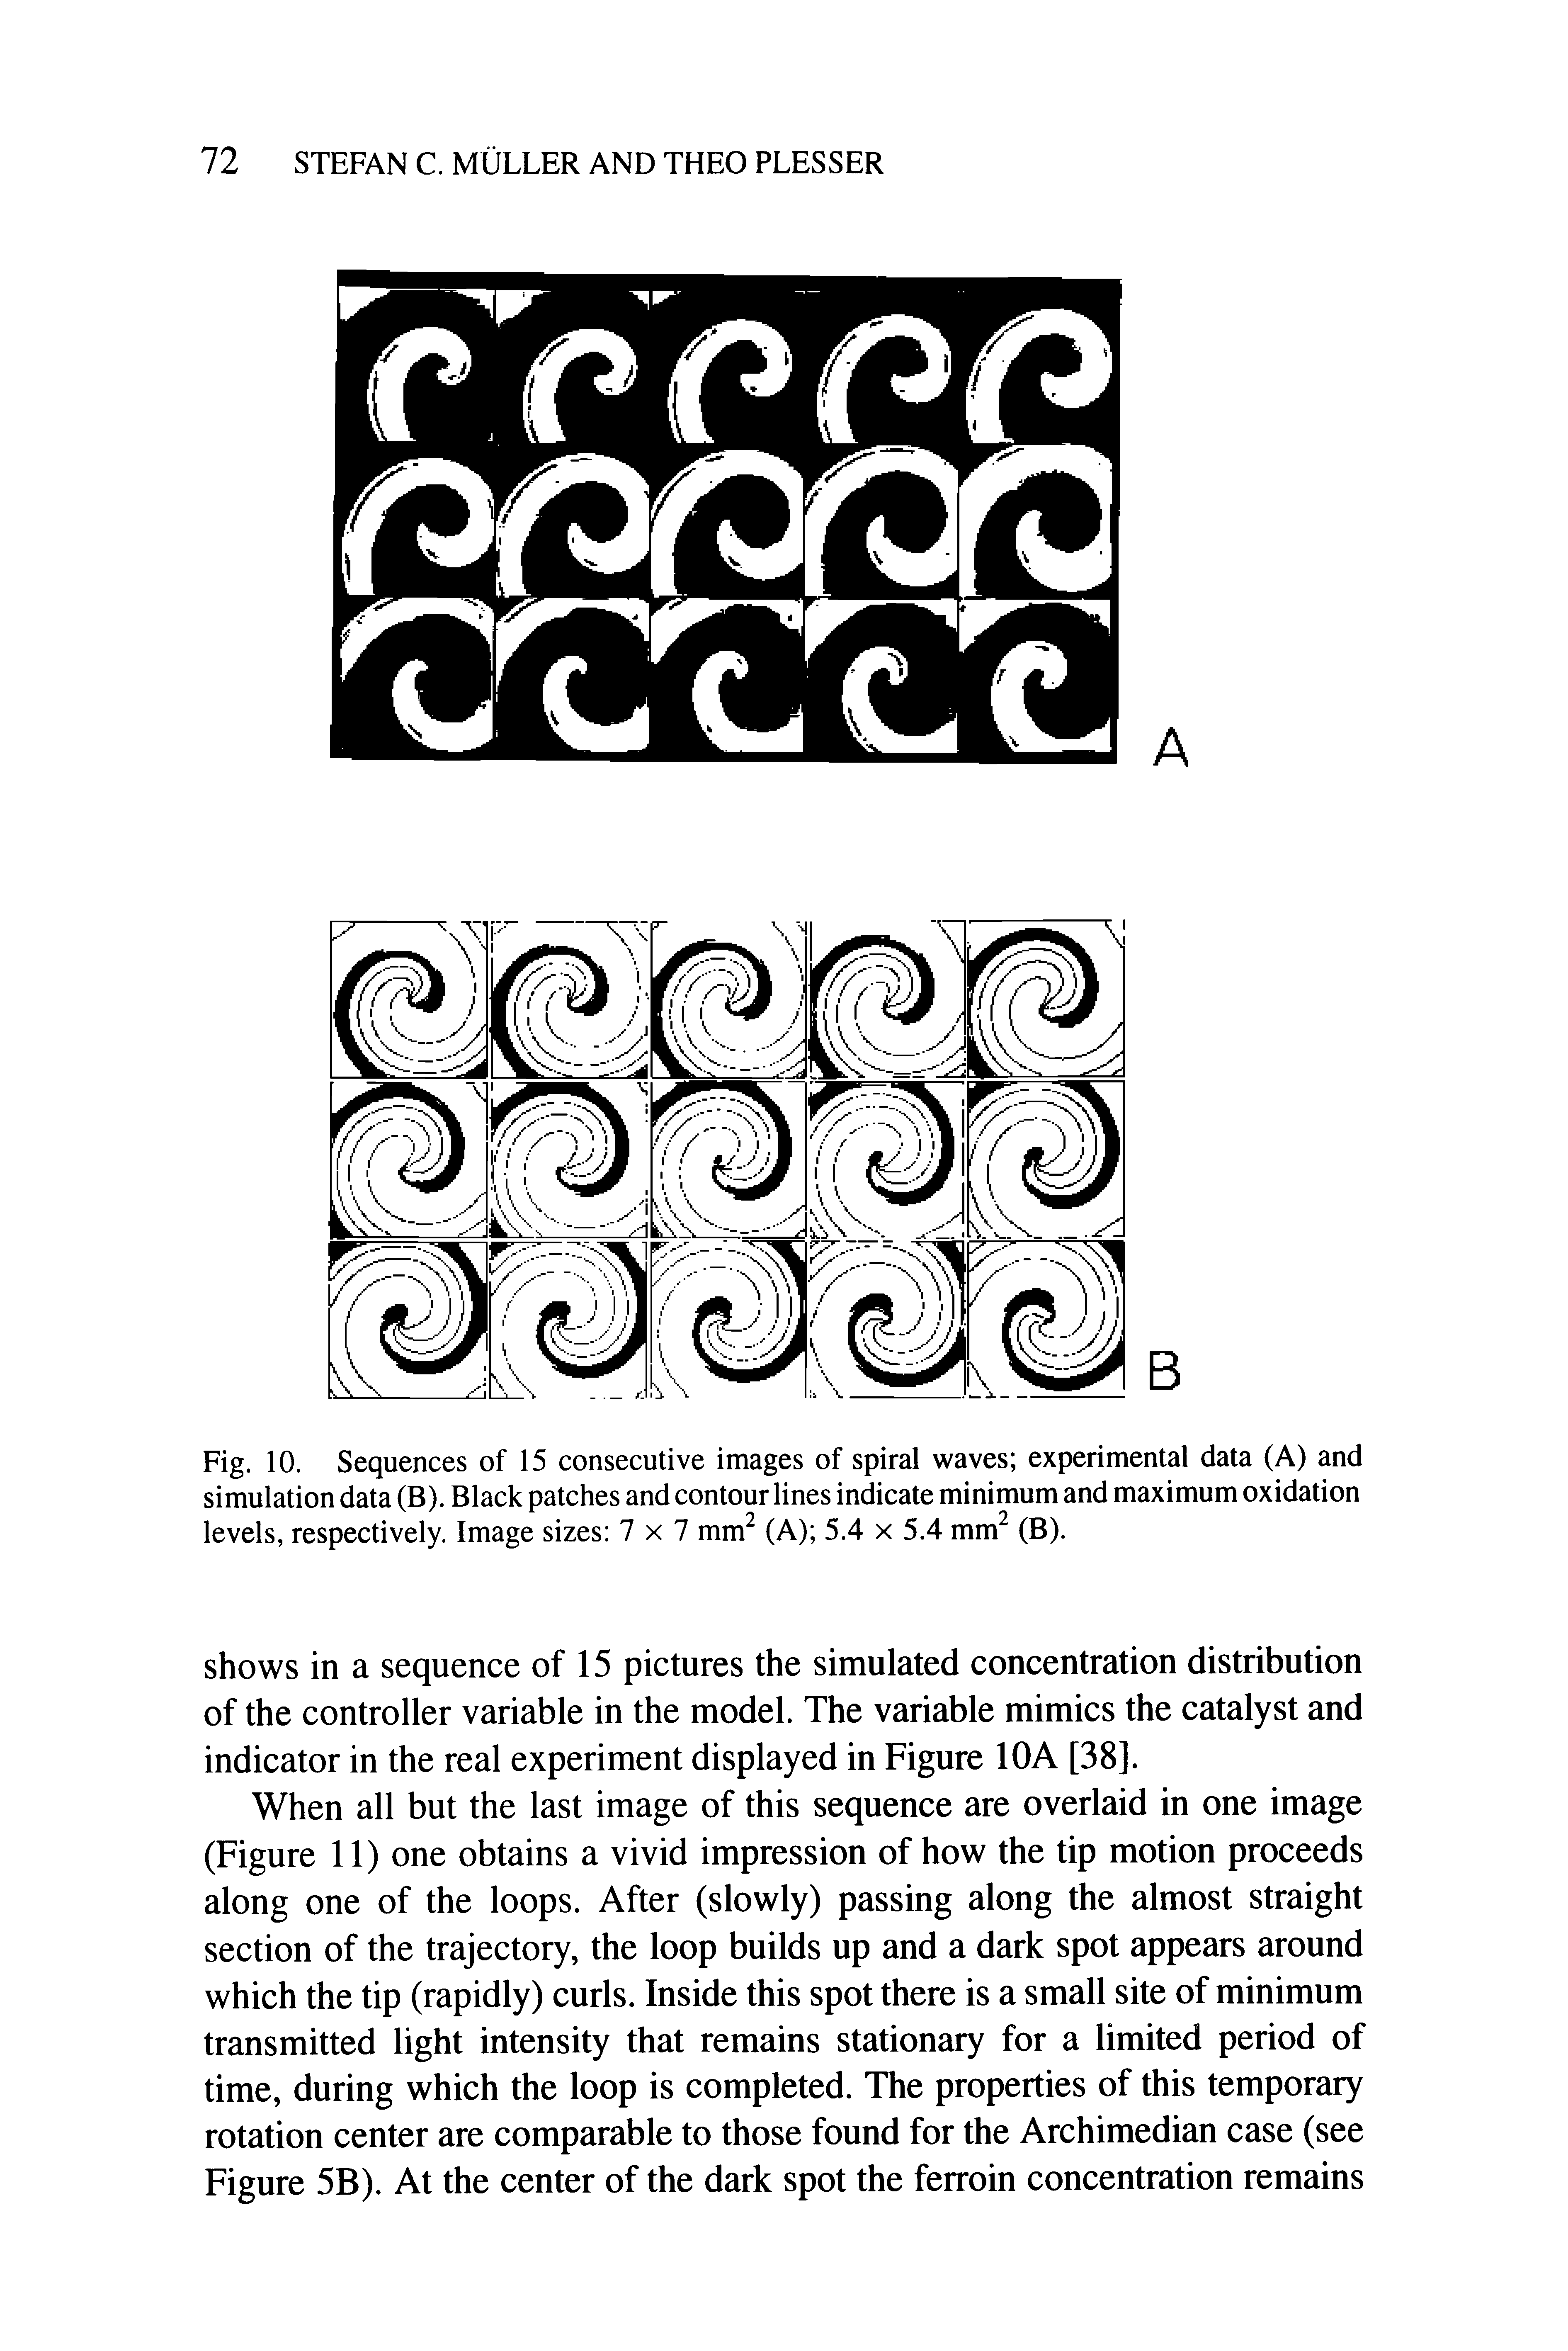 Fig. 10. Sequences of 15 consecutive images of spiral waves experimental data (A) and simulation data (B). Black patches and contour lines indicate minimum and maximum oxidation levels, respectively. Image sizes 7x7 mm (A) 5.4 x 5.4 mm (B).